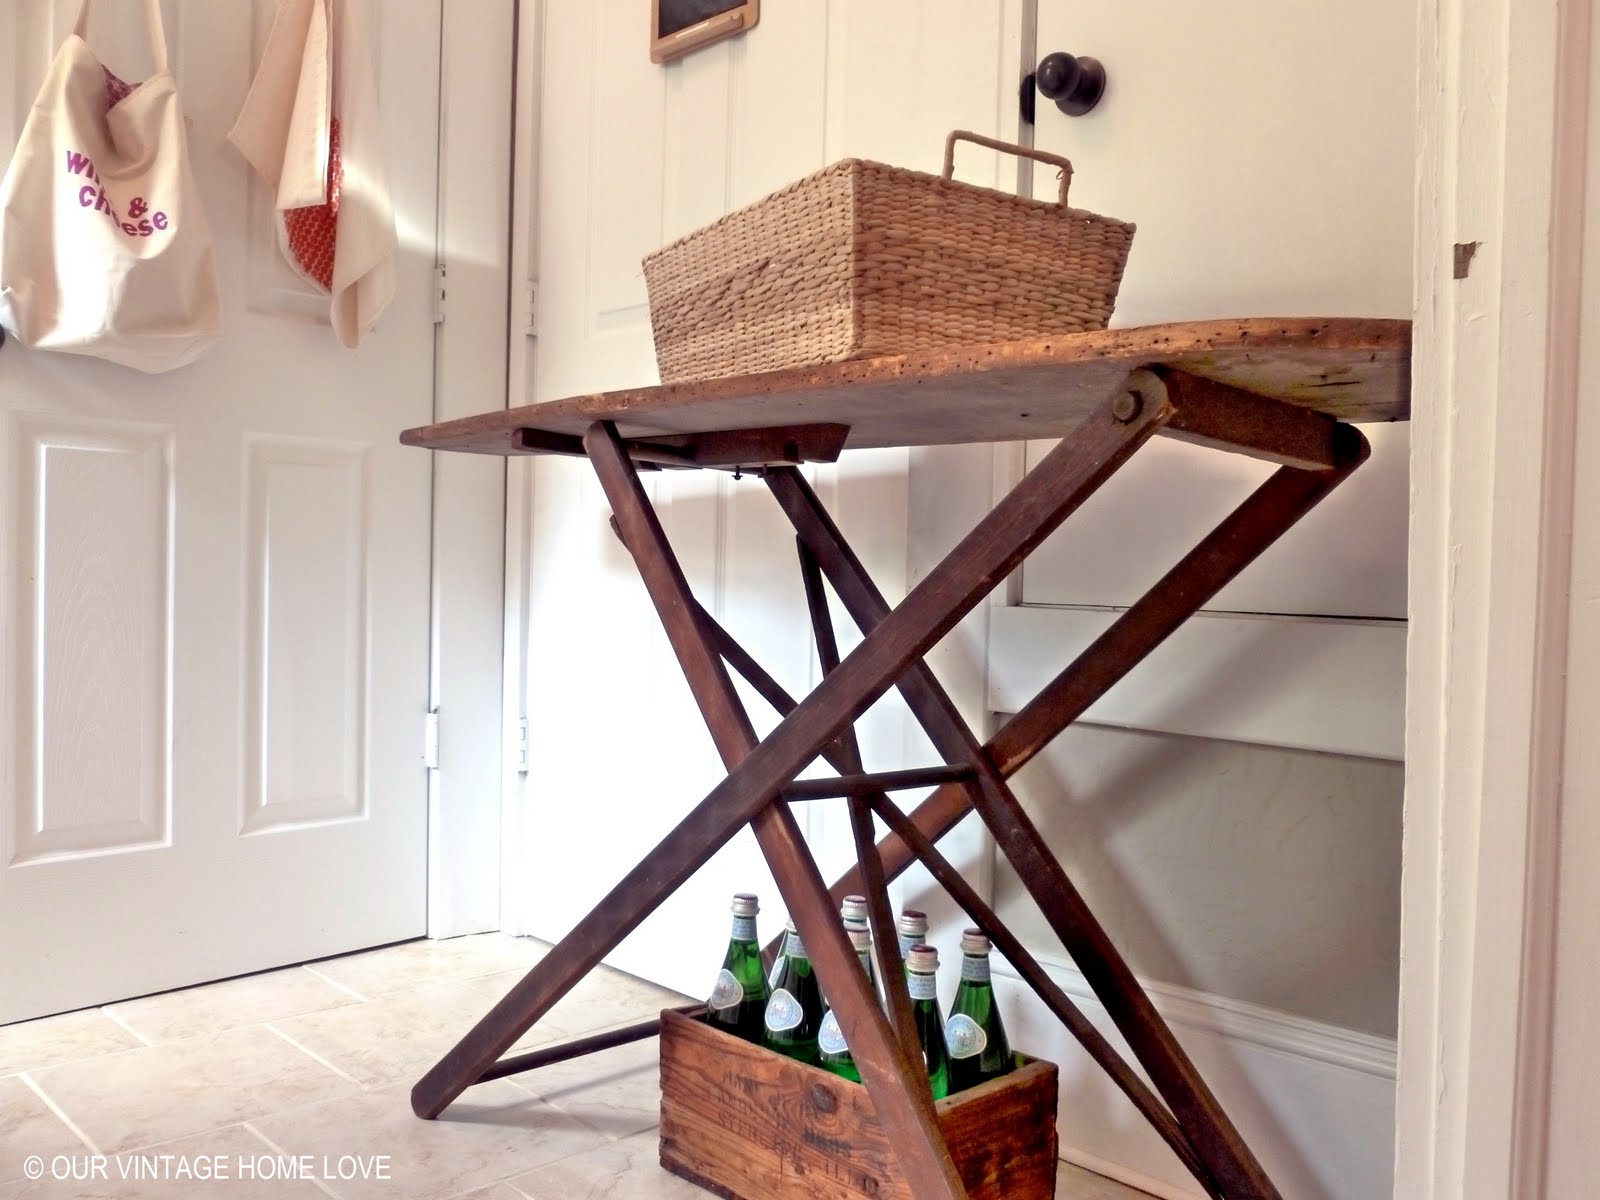 5 Best Old Wooden Ironing Board Decor Ideas for 2020 - PopVintage